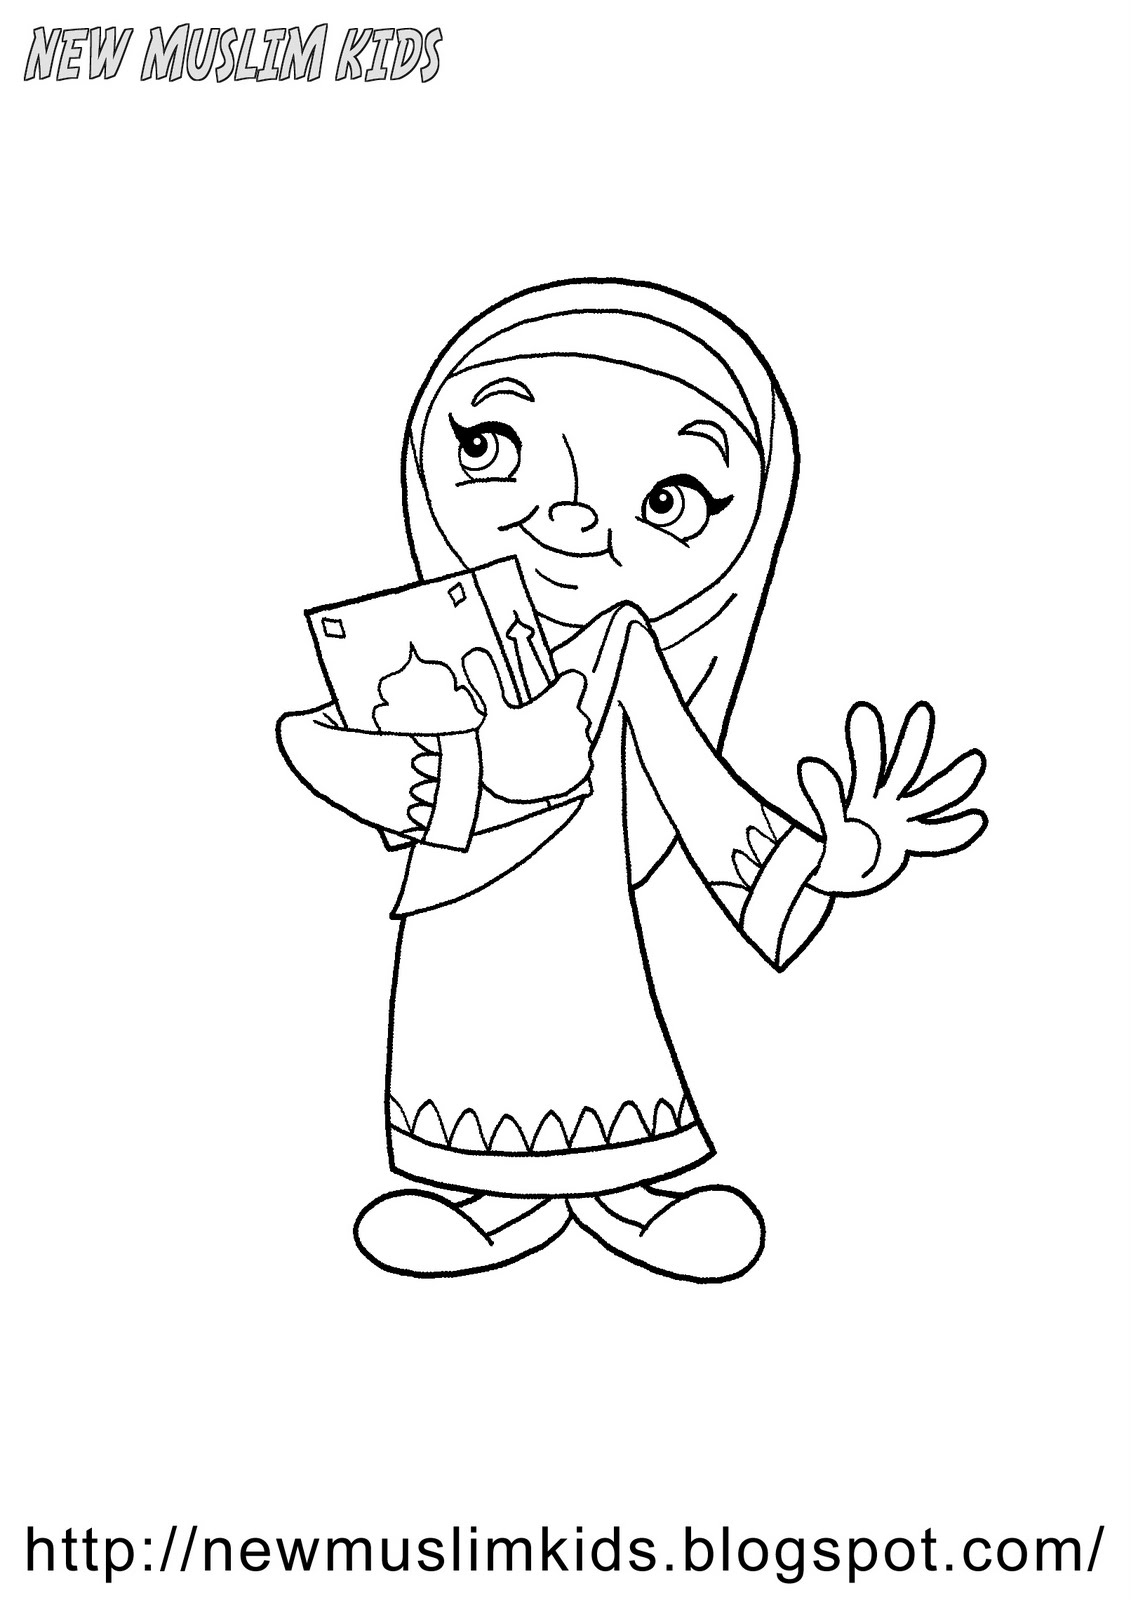 Download New Muslim Kids: Coloring Pages for Free 8: